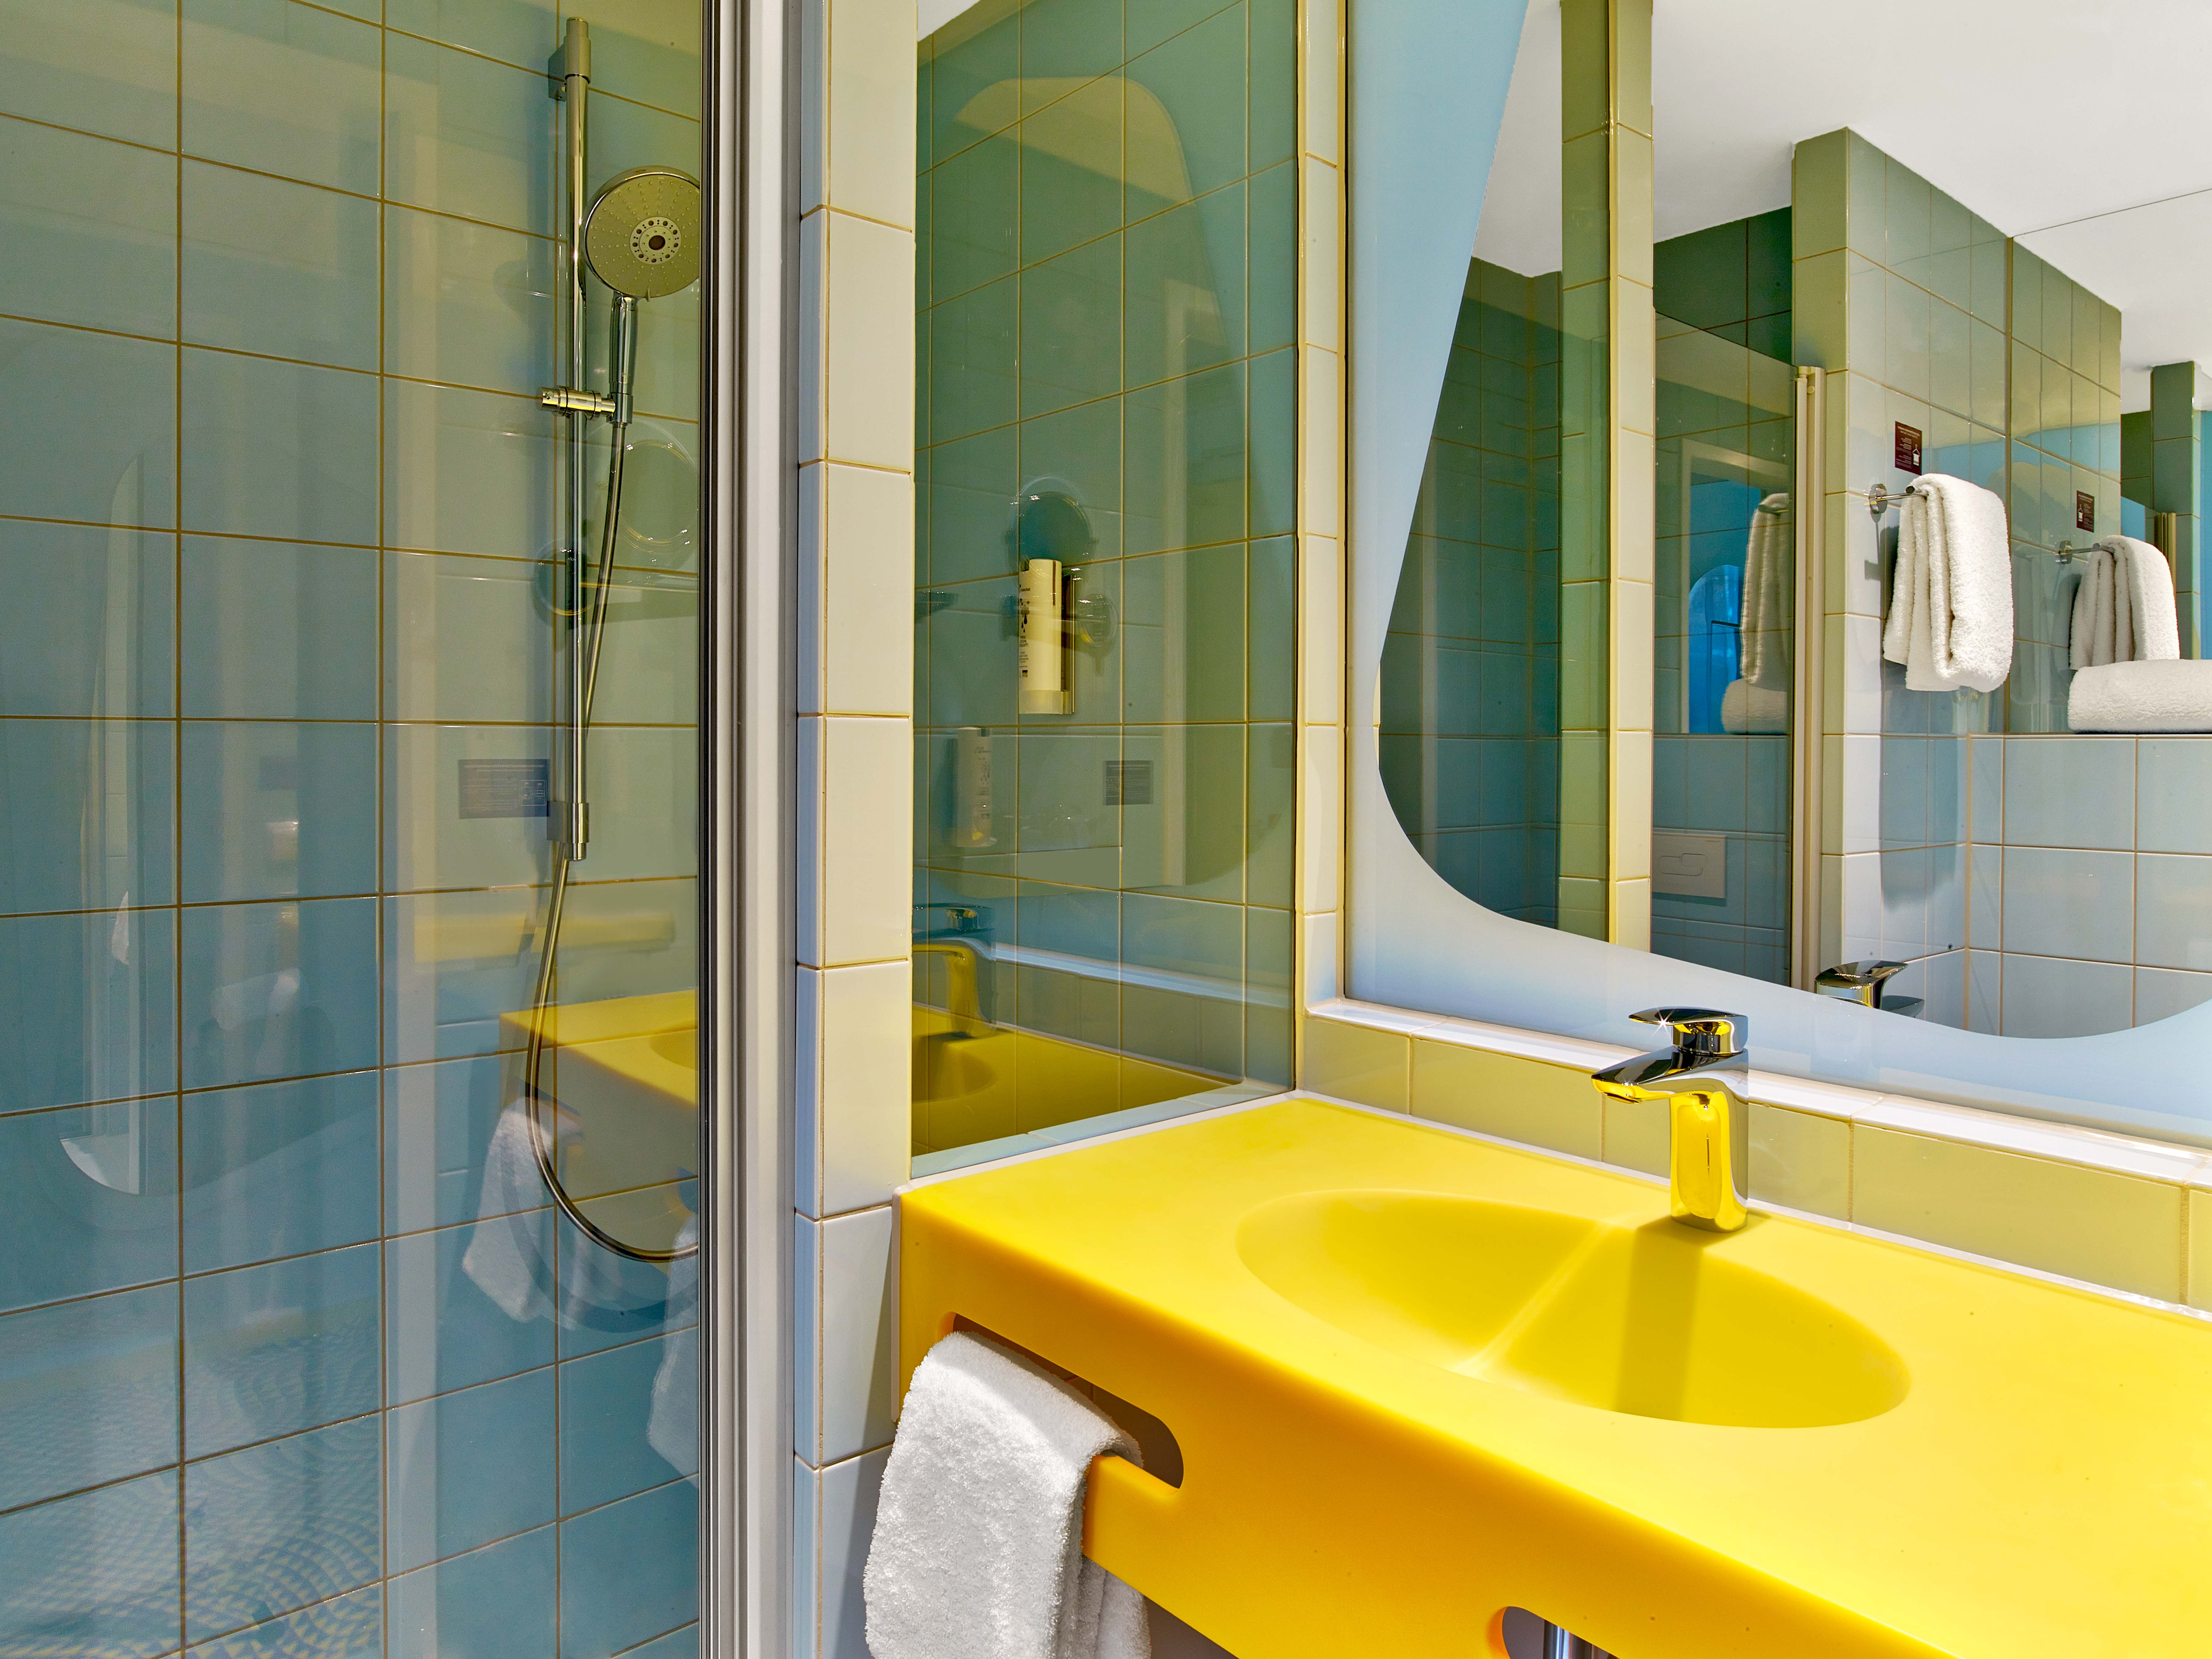 A spacious and modern bathroom of prizeotels in yellow colour can be seen